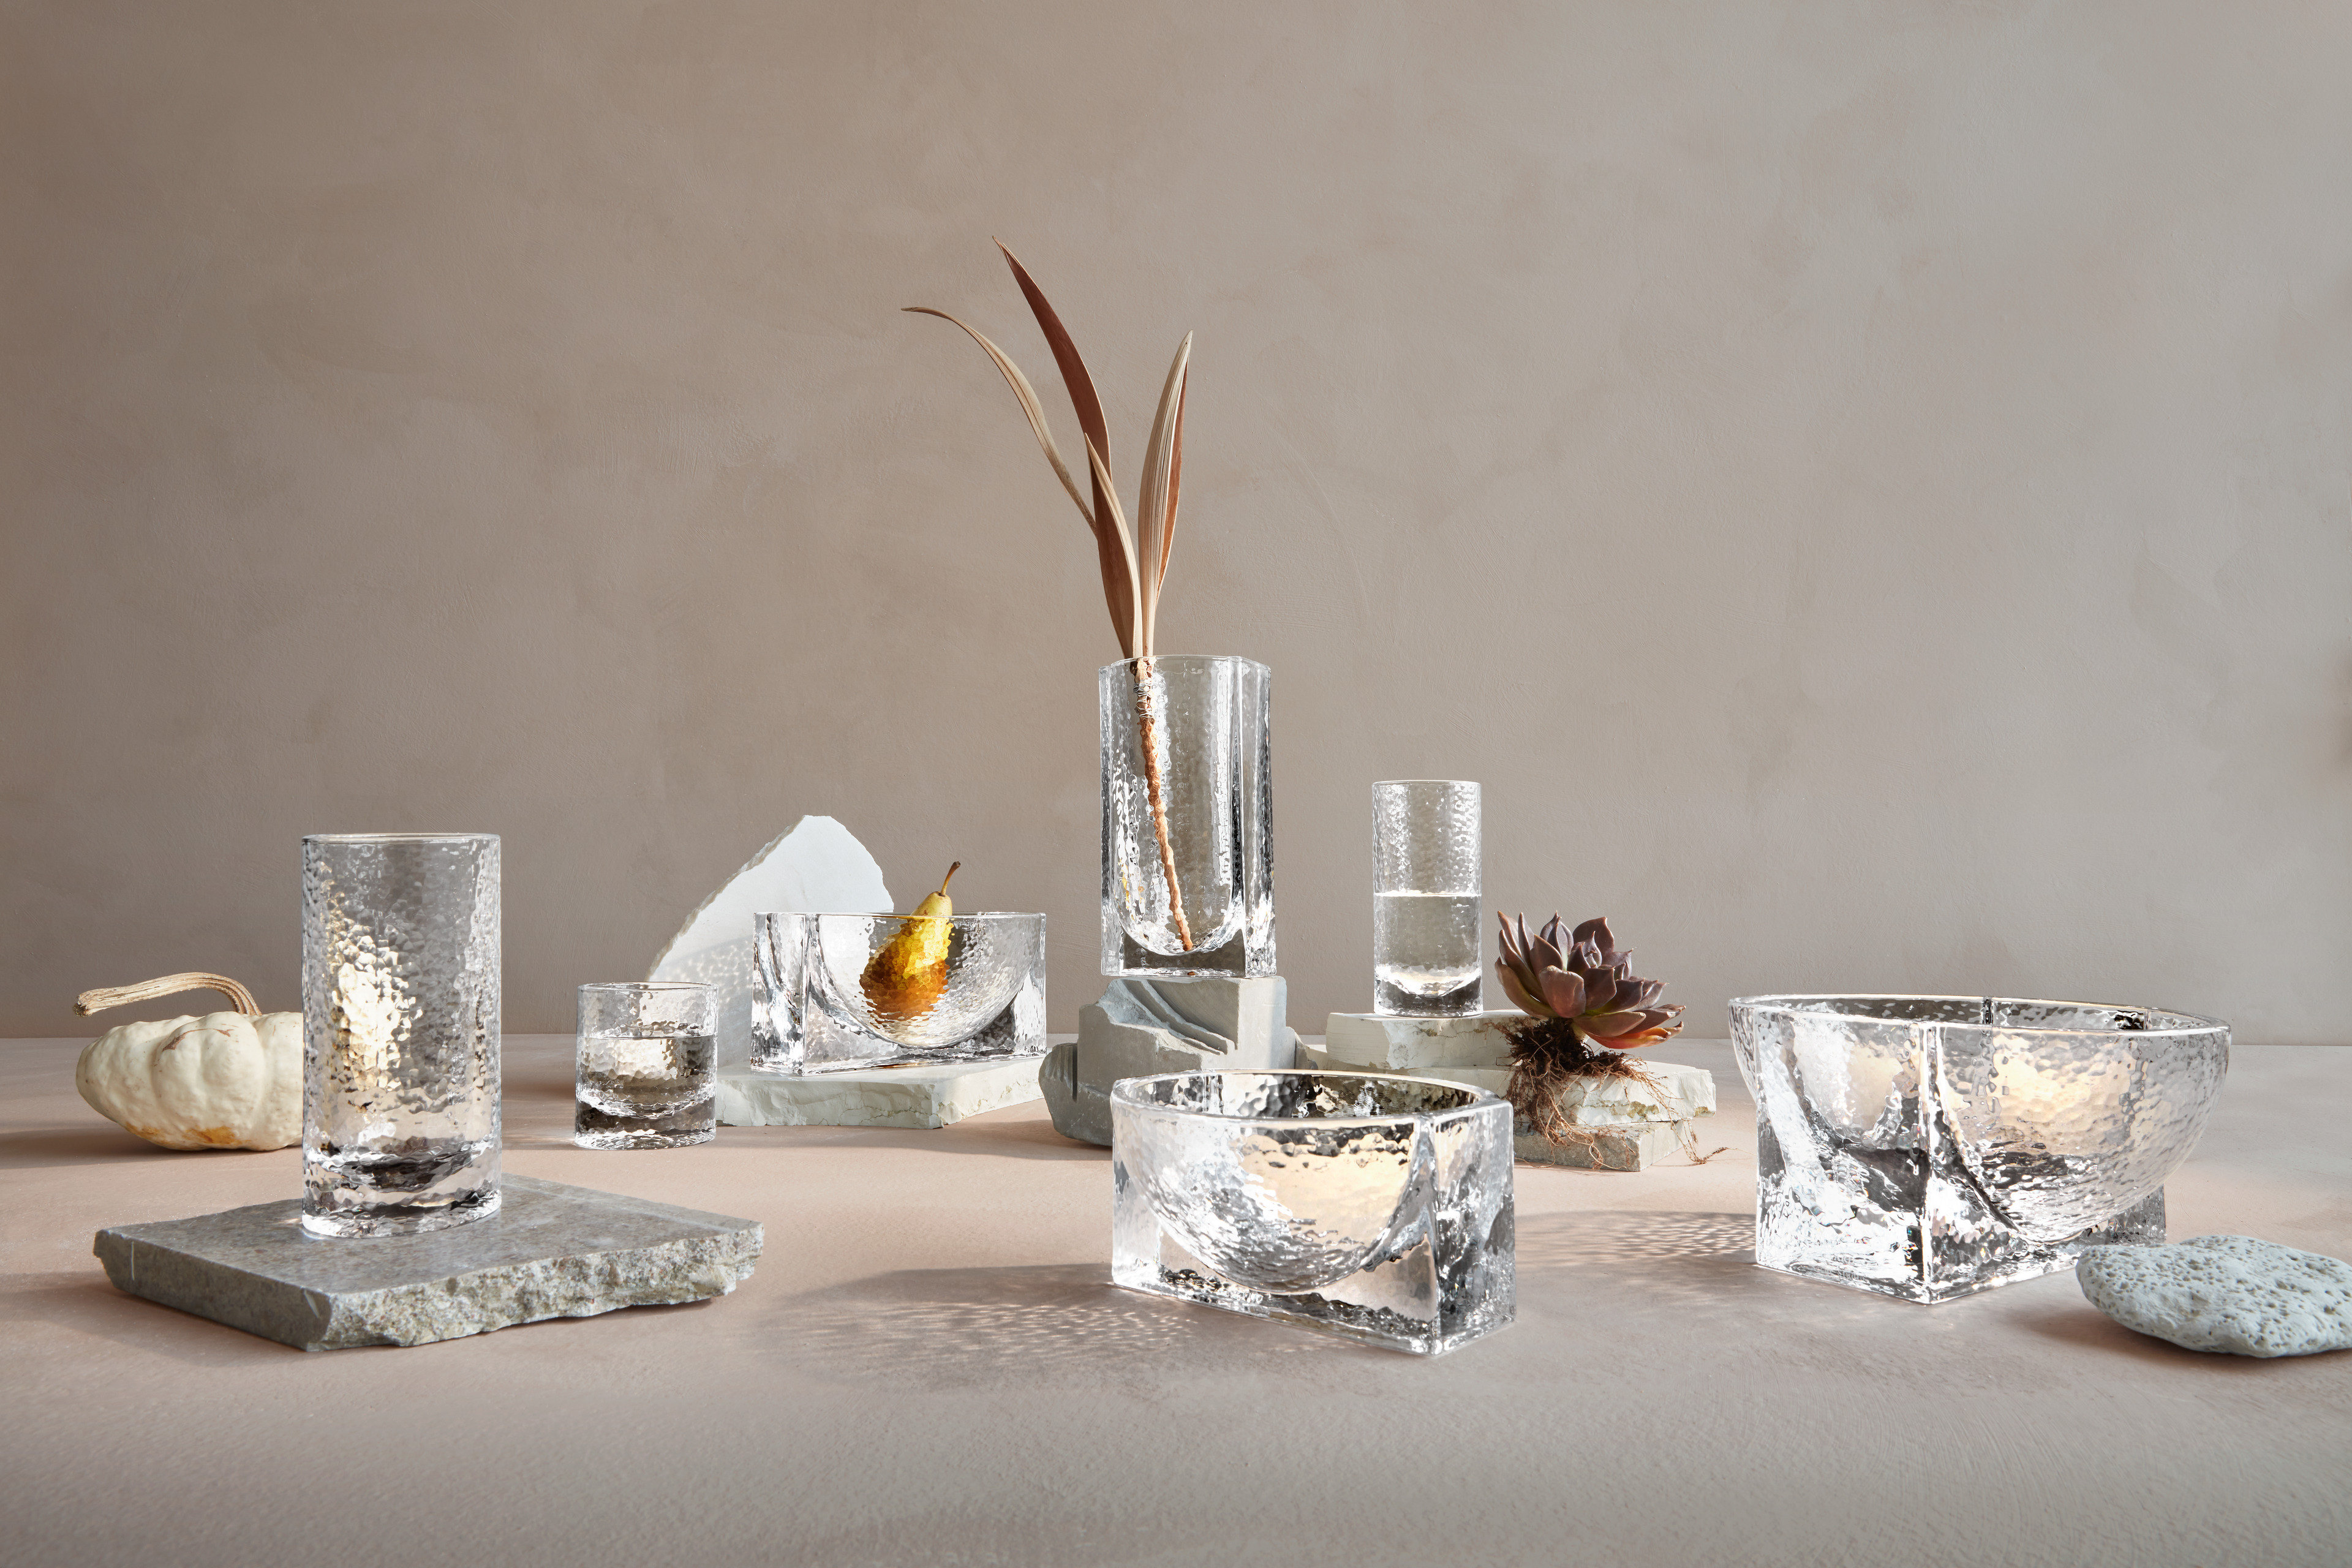 Table with Forma vases and bowls in the series from Holmegaard